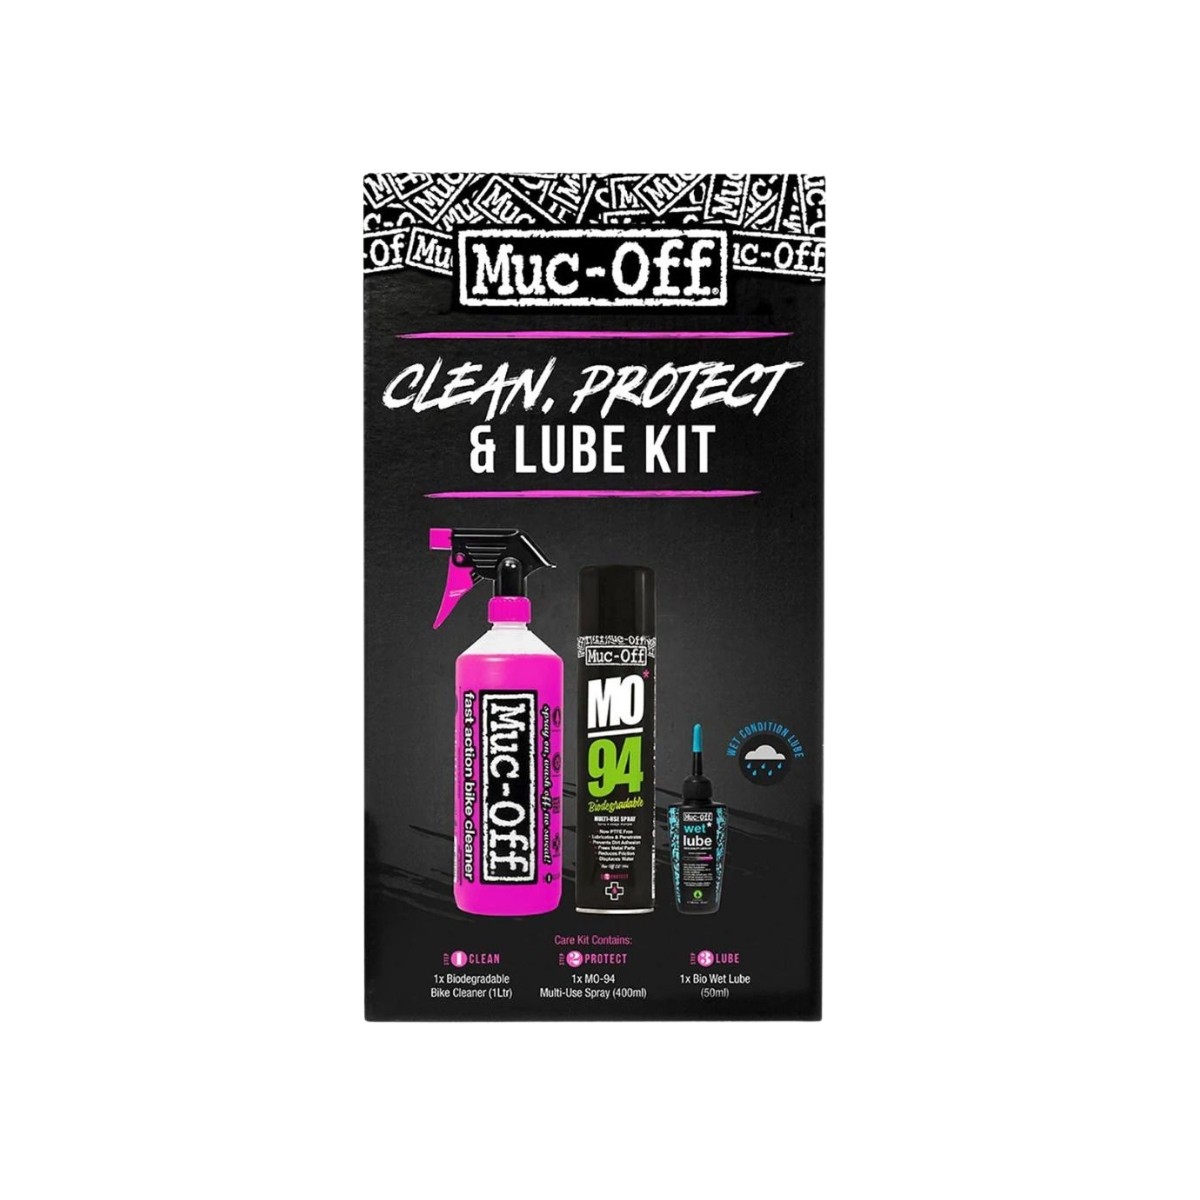 MUC-OFF CLEAN PROTECT & LUBE KIT chain oil